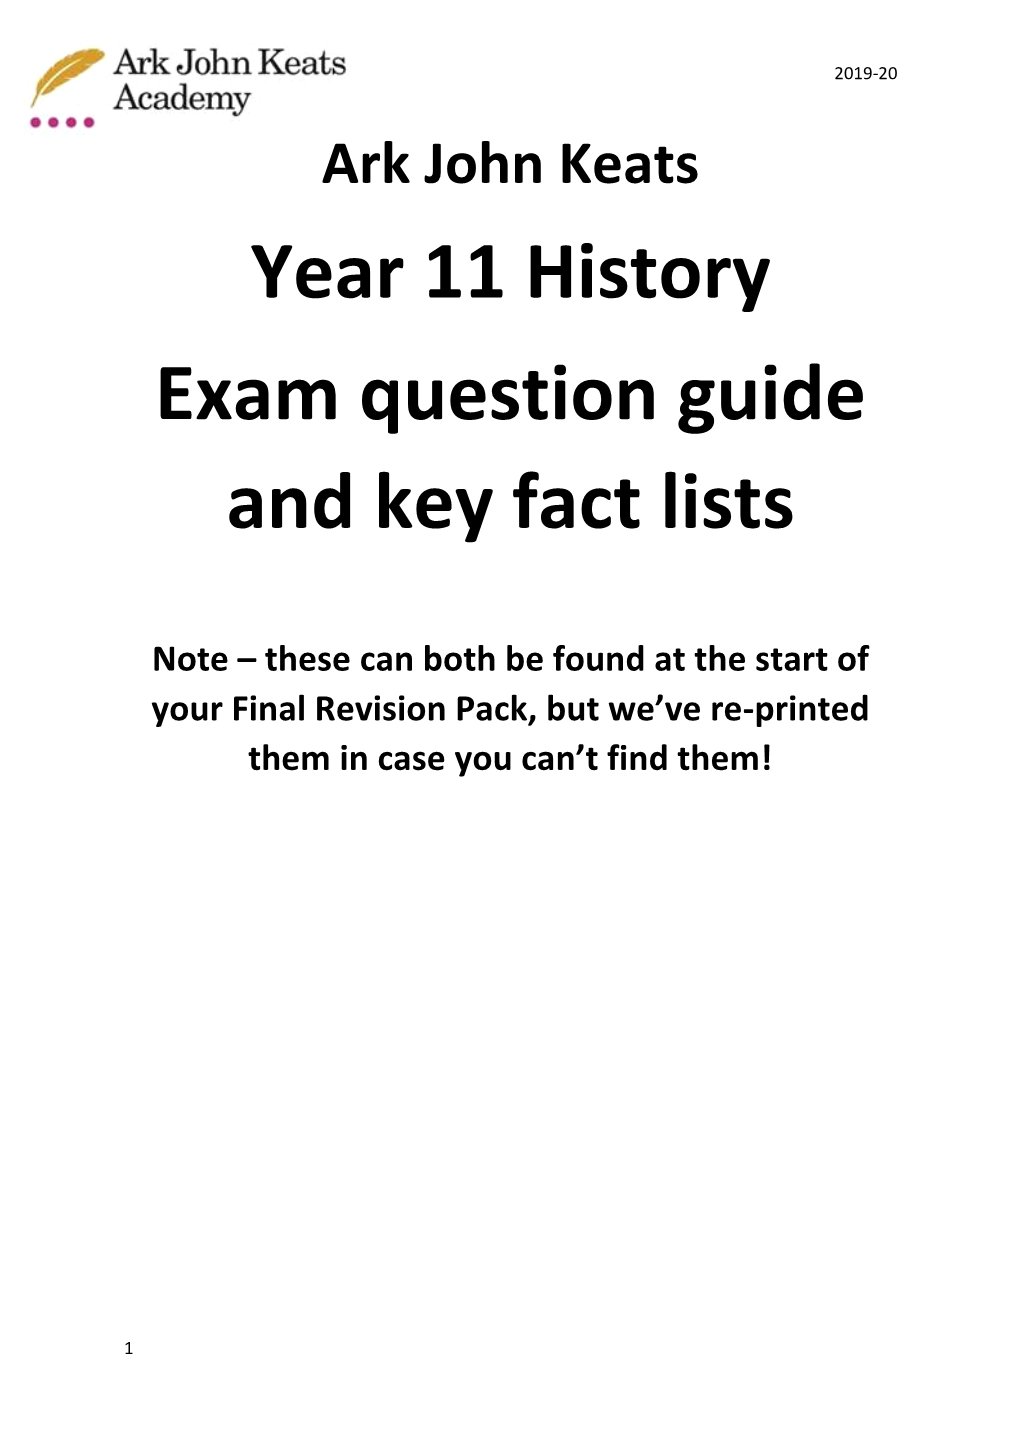 Year 11 History Exam Question Guide and Key Fact Lists